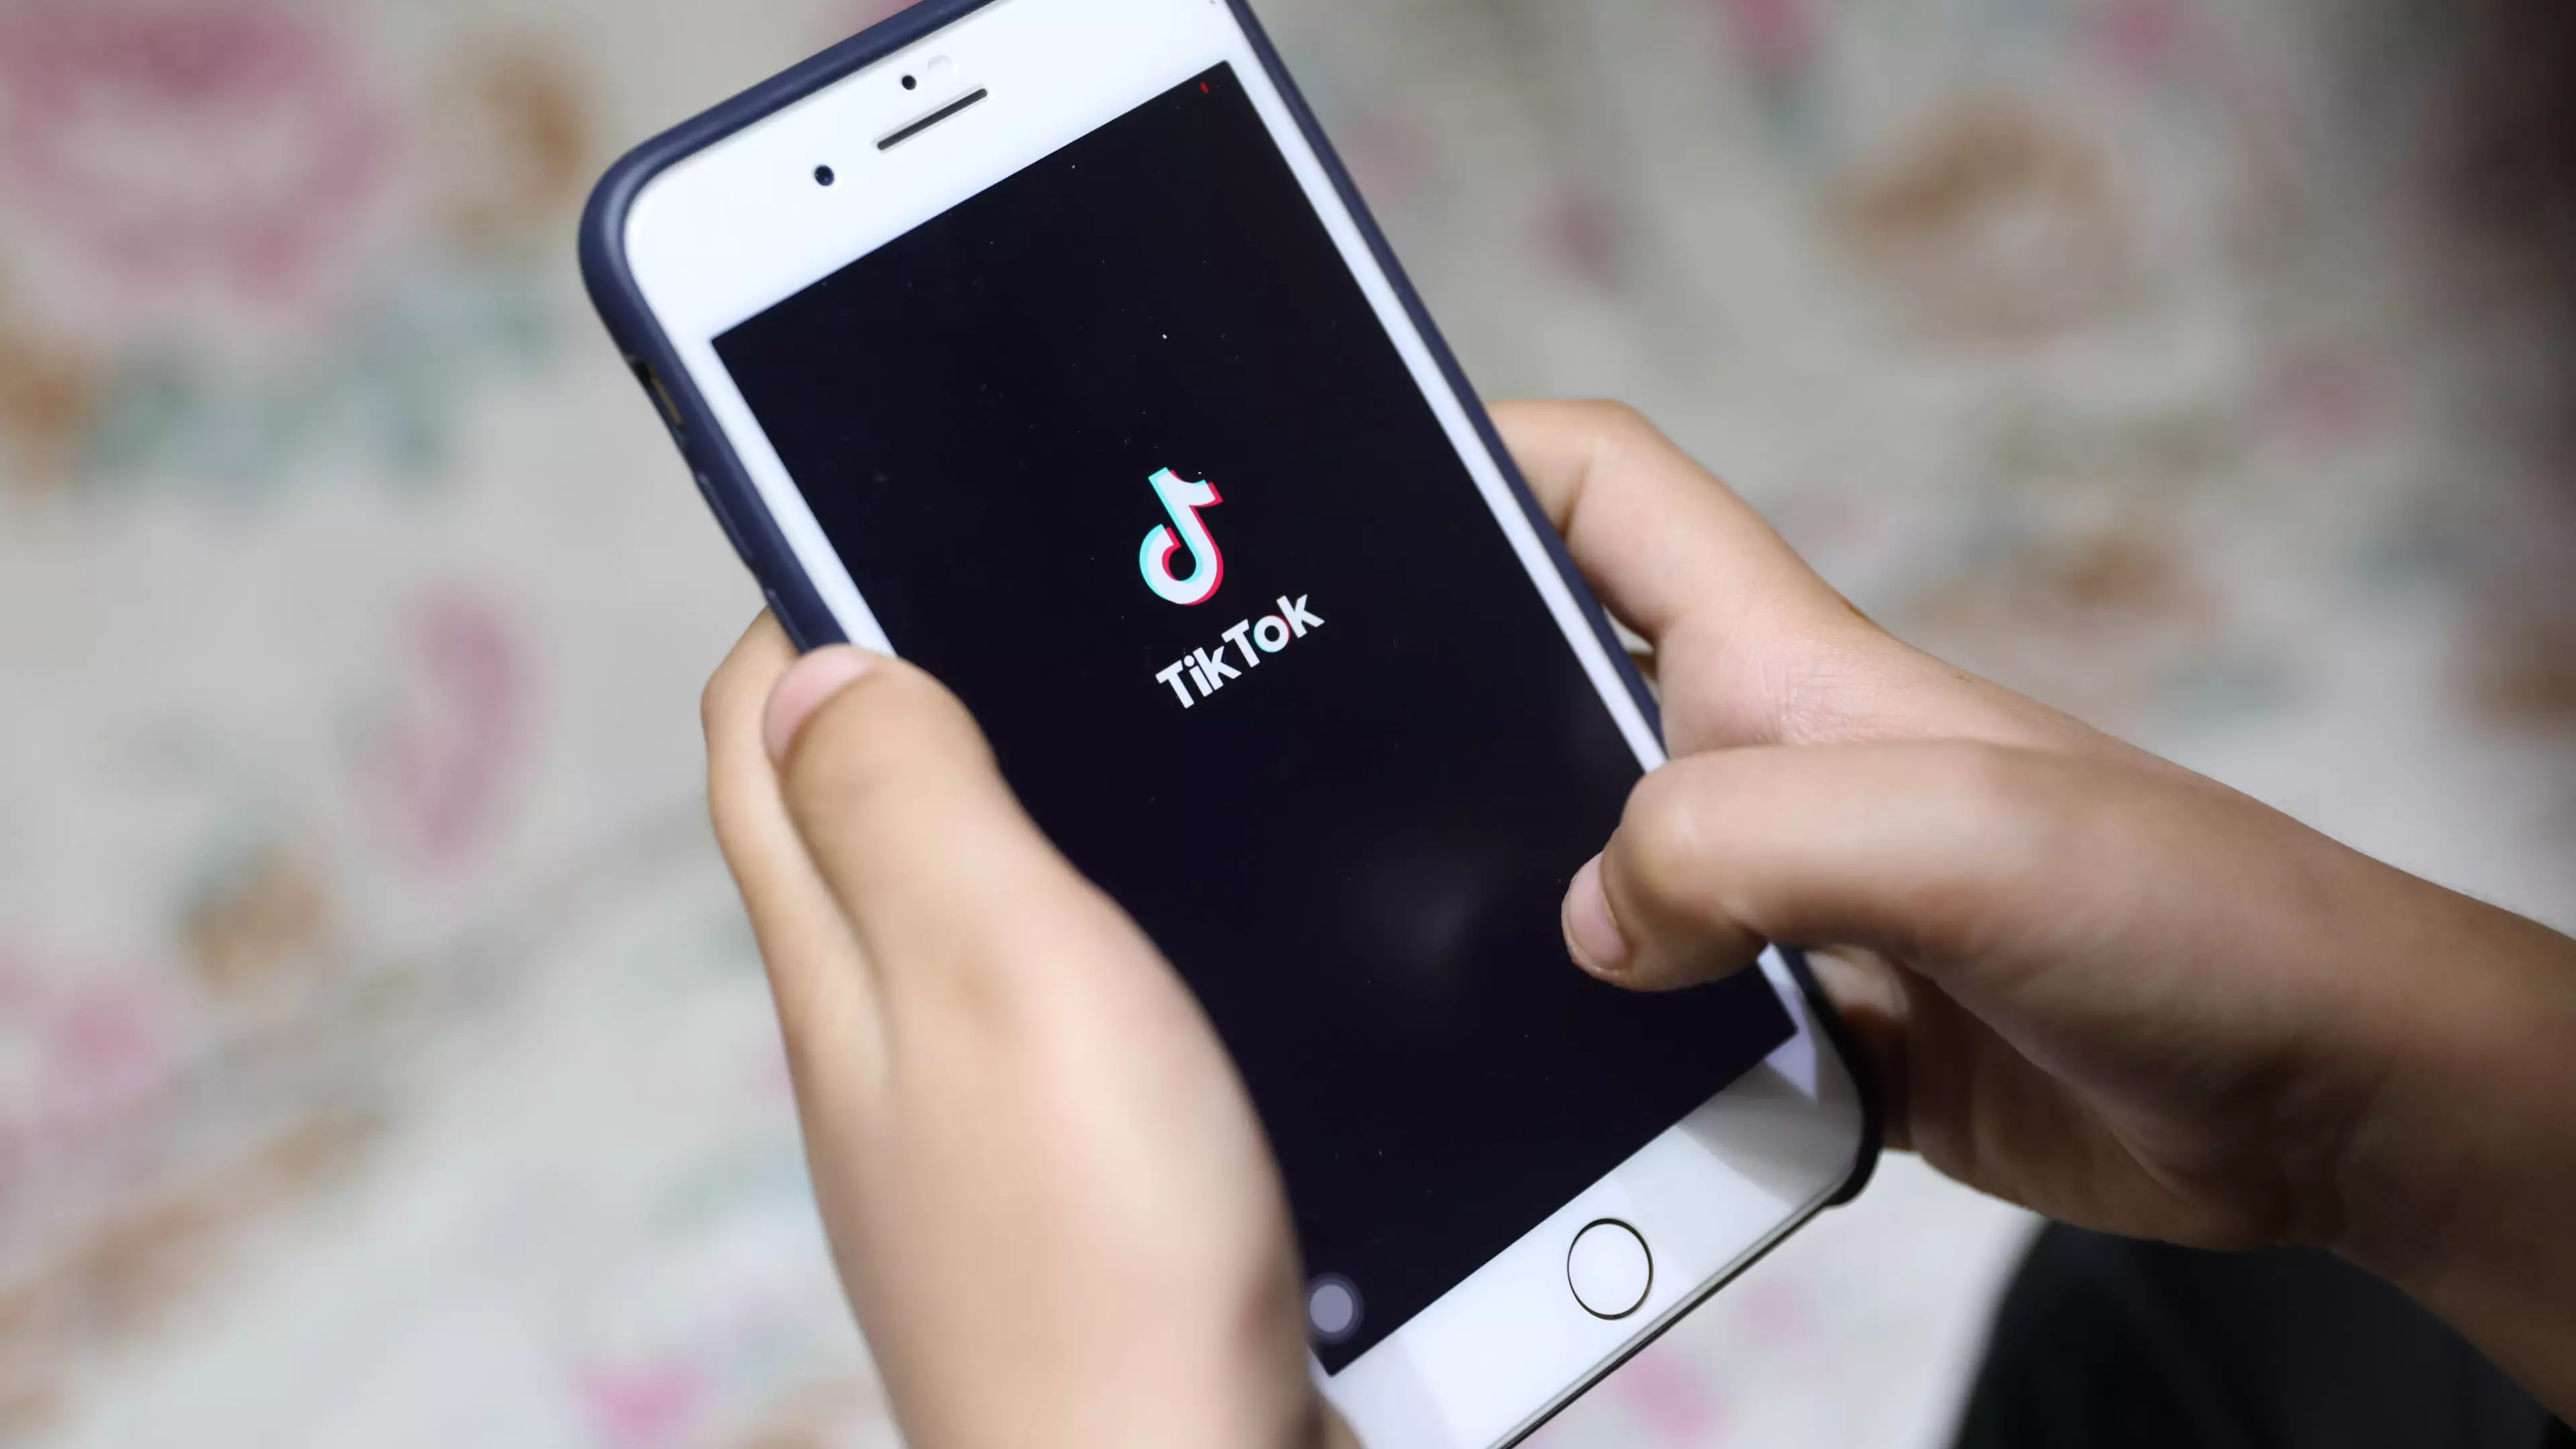 Teenage TikTok User Dies After Prank Involving Weapon Went Horribly Wrong